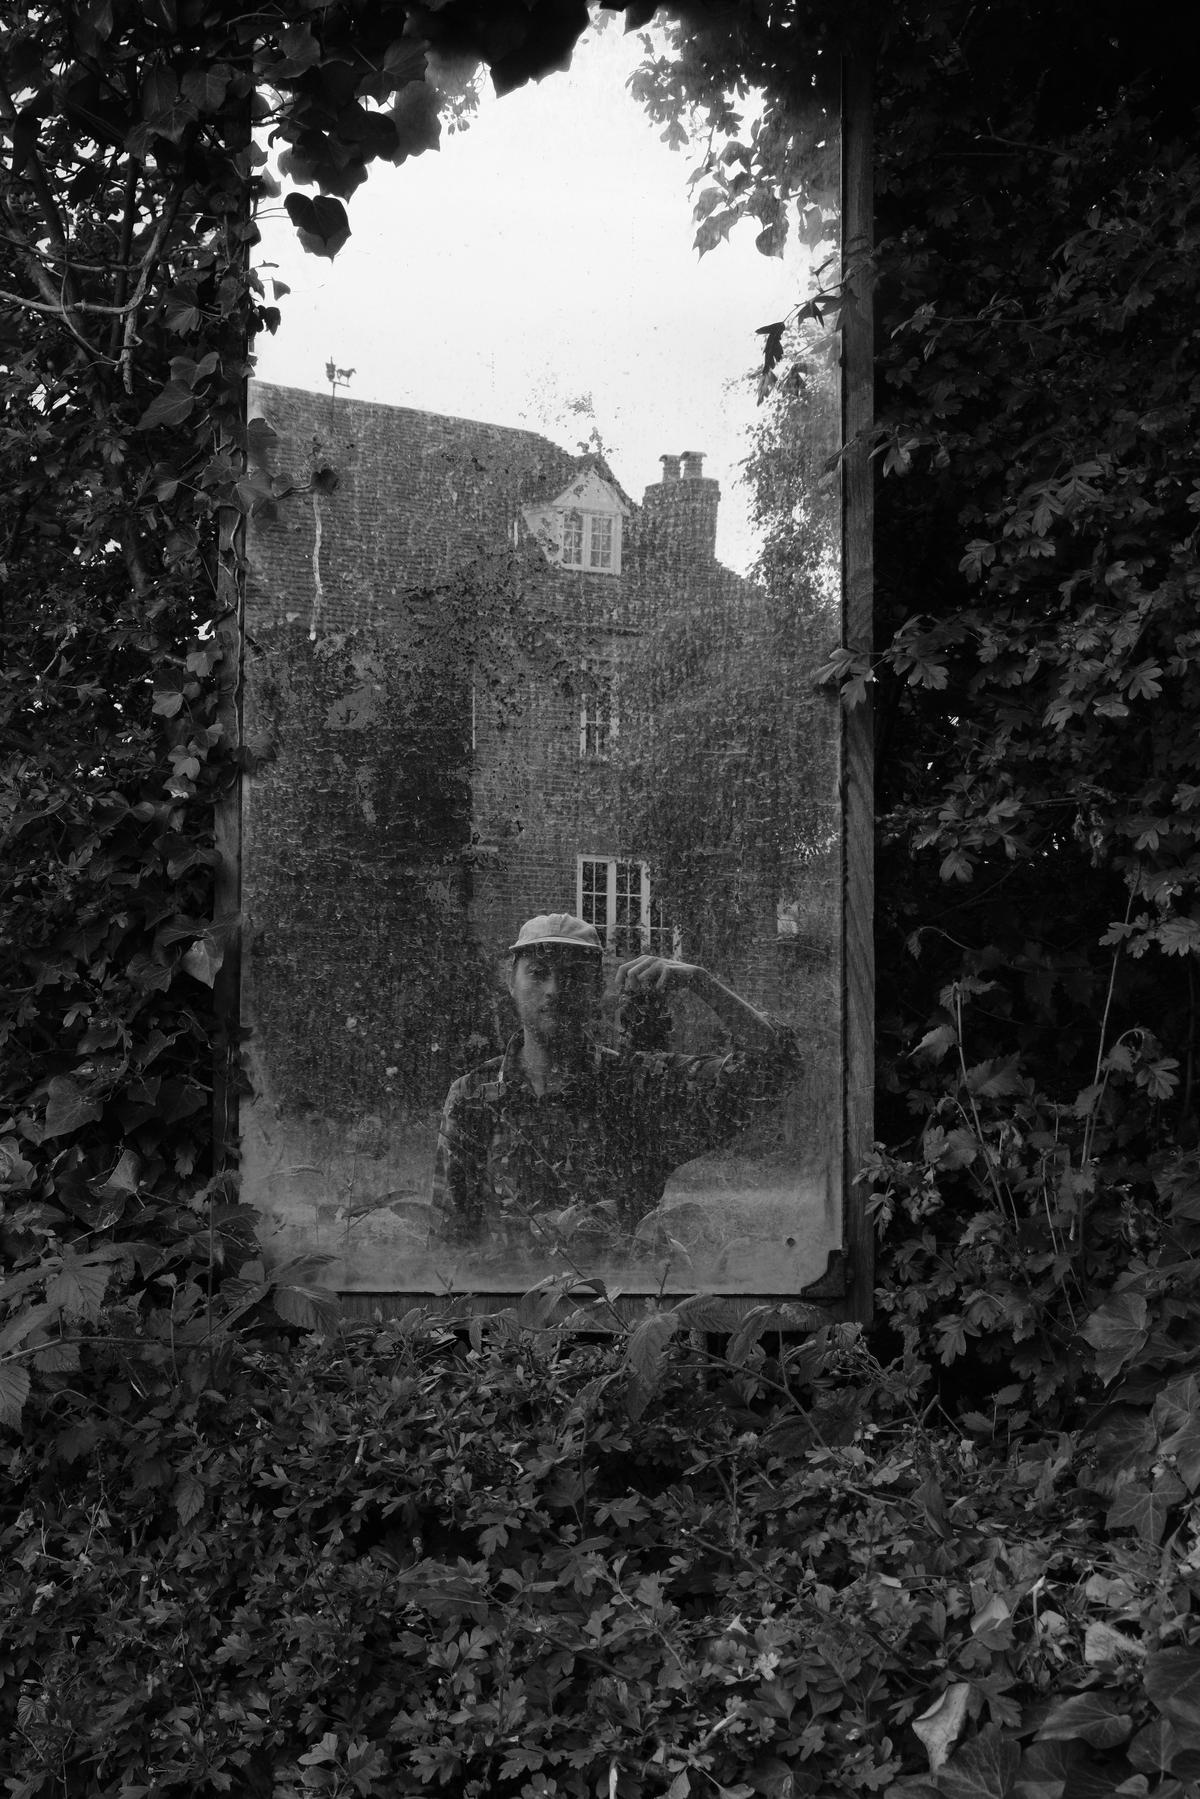 A self-portrait in a tall mirror set into a country hedge